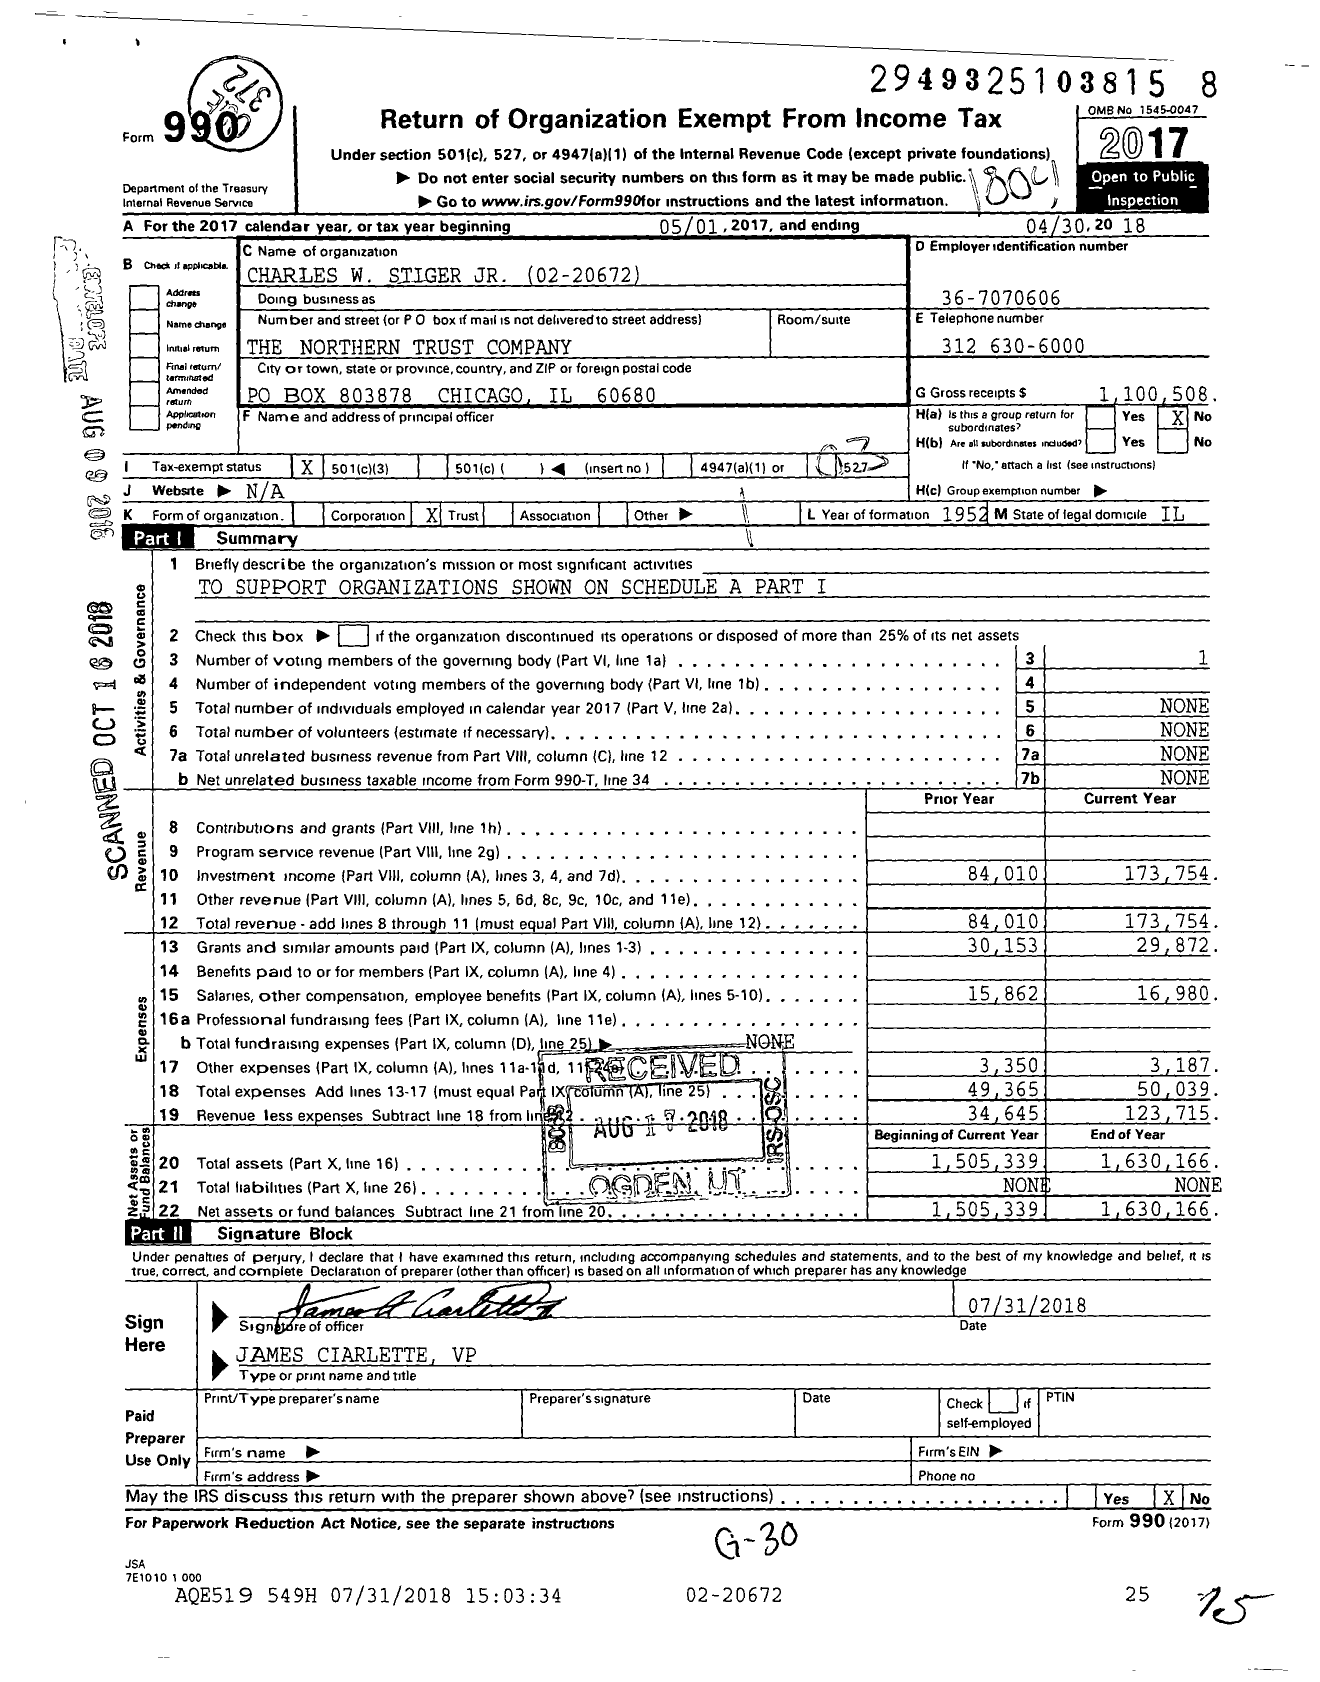 Image of first page of 2017 Form 990 for Charles W Stiger JR